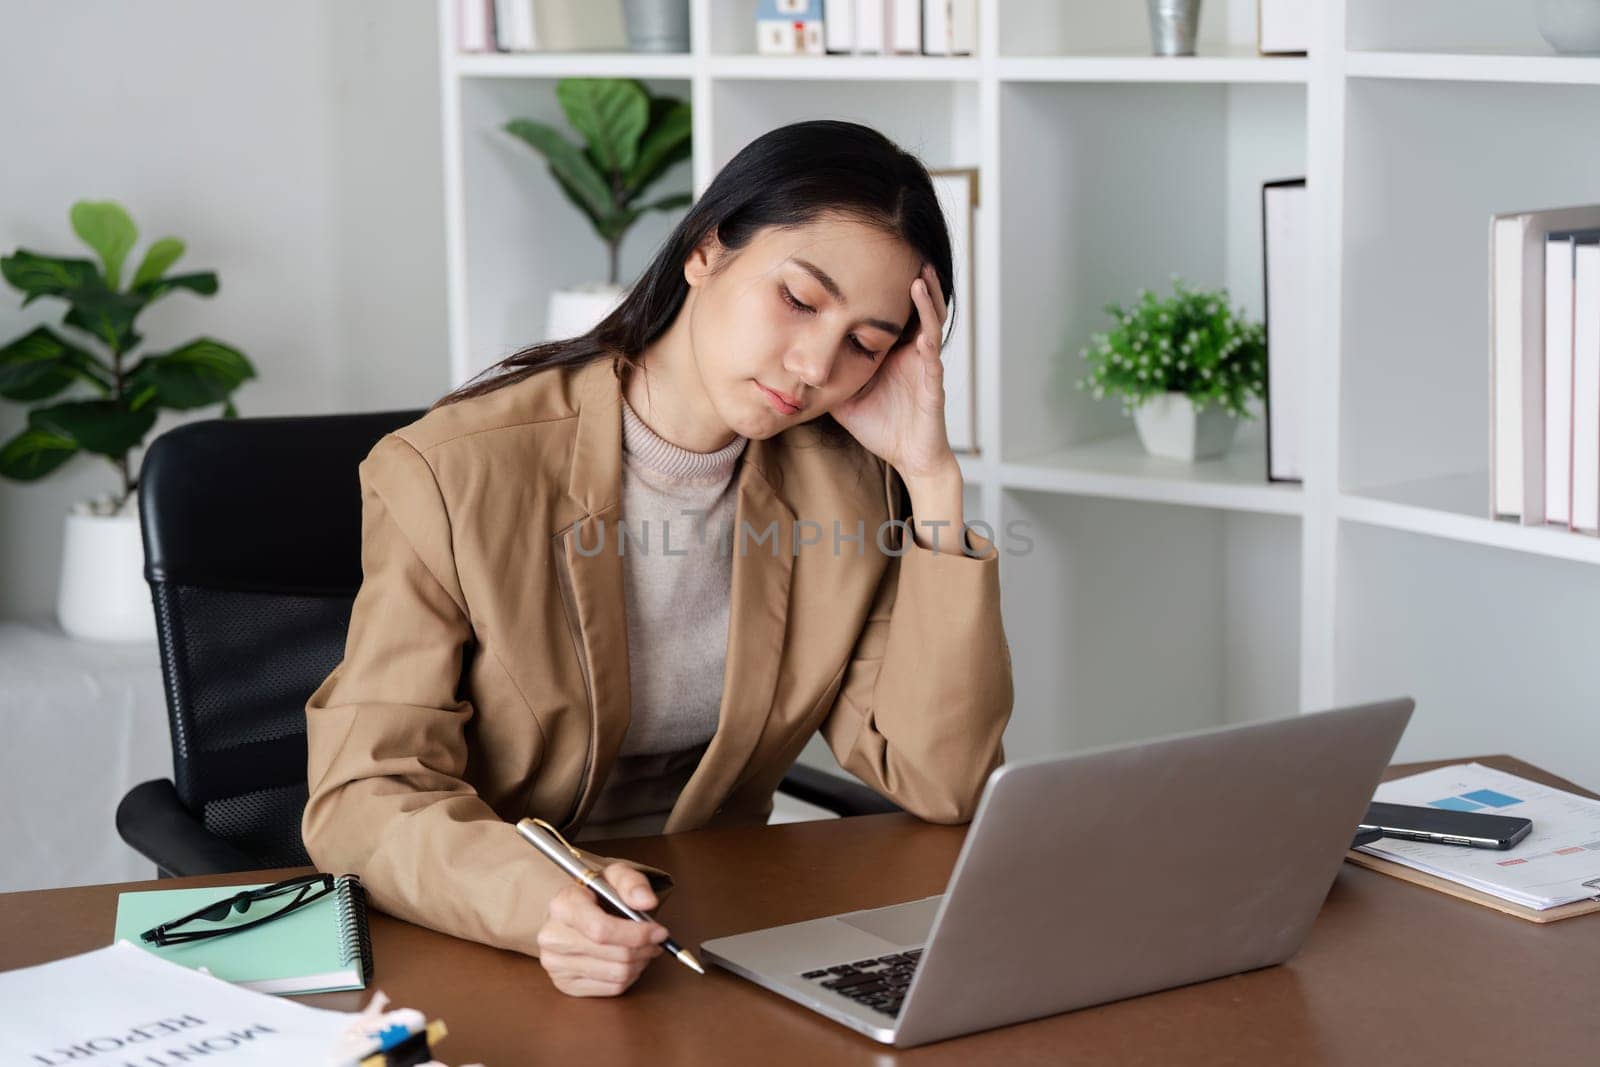 A woman is sitting at a desk with a laptop and a pen. She is writing something on a piece of paper